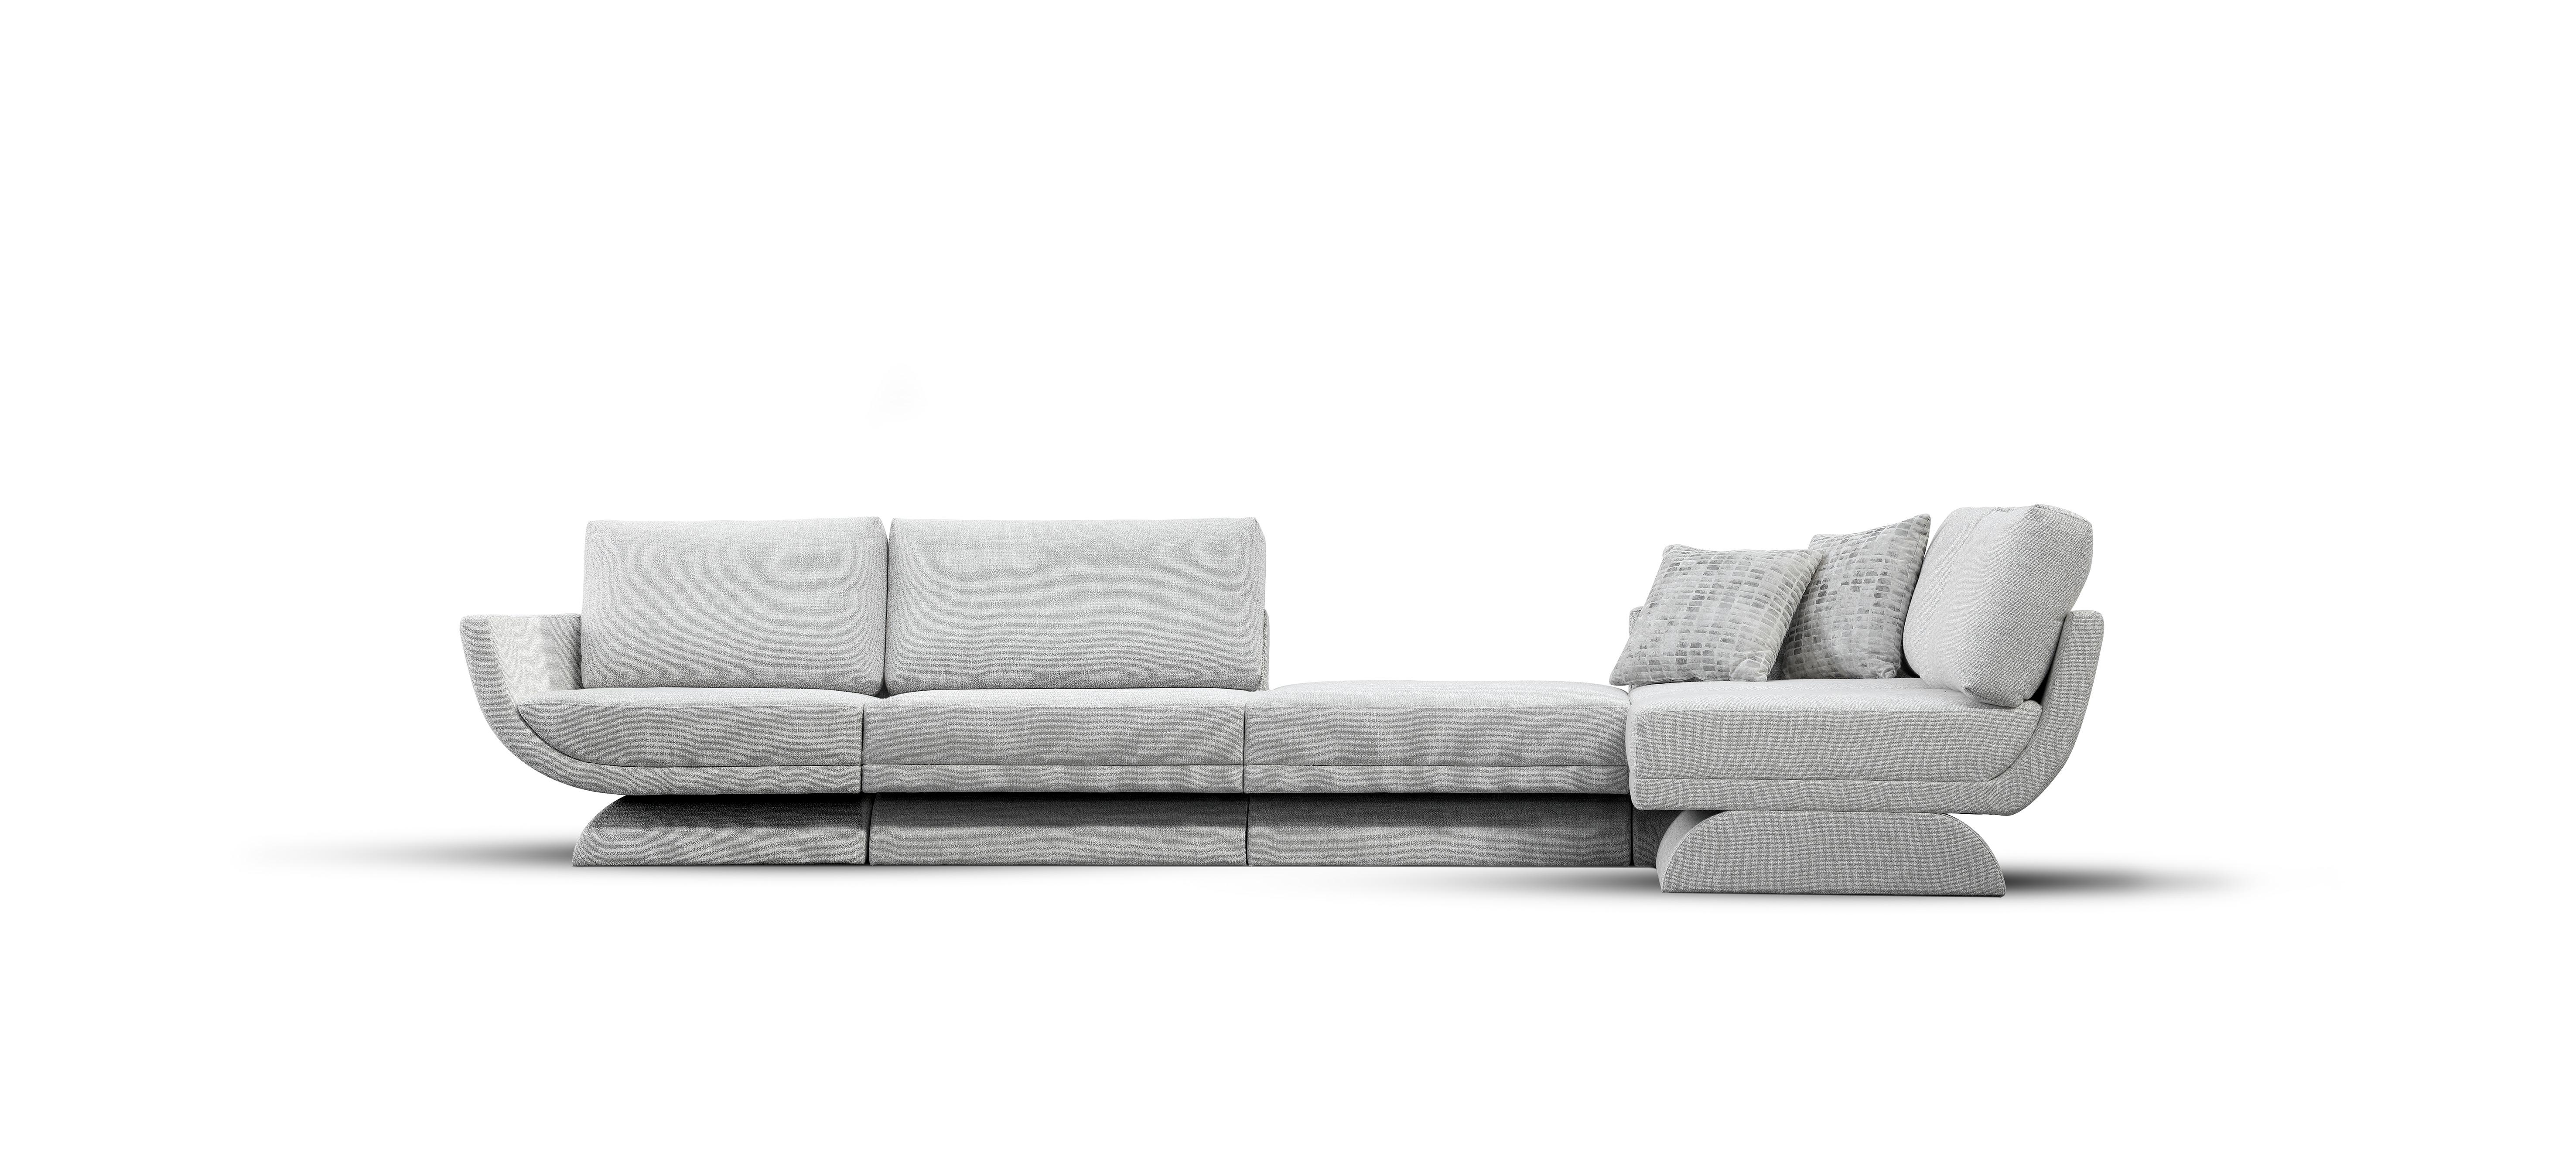 Oscar Modular Sofa, End Module, Handcrafted in Portugal by Duistt

Inspired by the poetic curved lines of Oscar Niemeyer’s architecture, Oscar modular sofa middle allures for its sensual and free-flowing curves. Like Niemeyer once said “Curves make